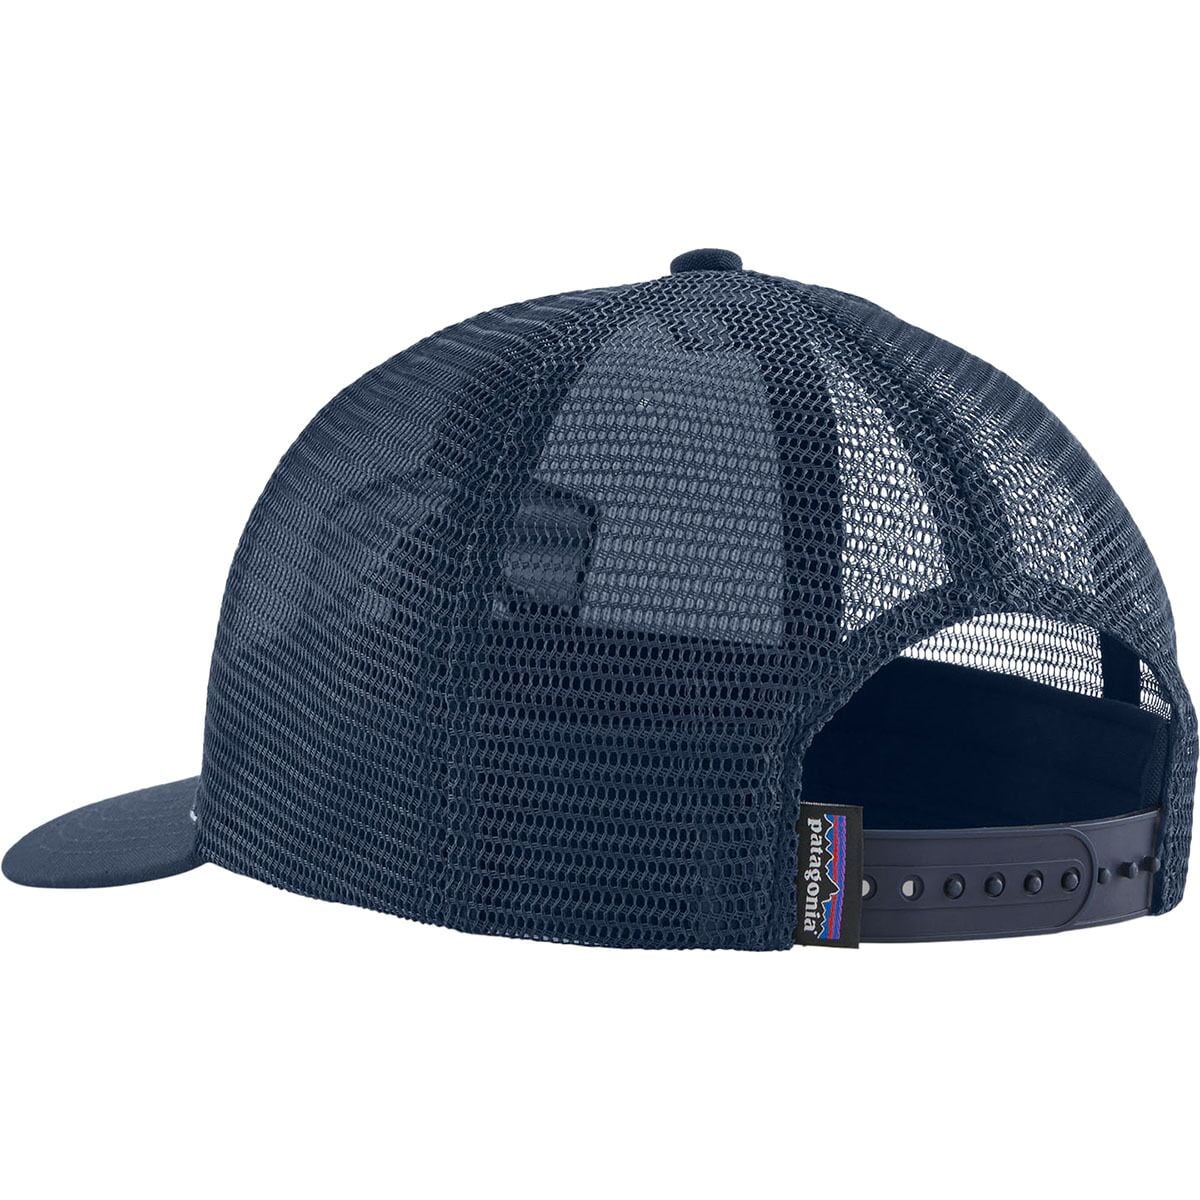 Fitz Roy Trout Trucker white forge grey